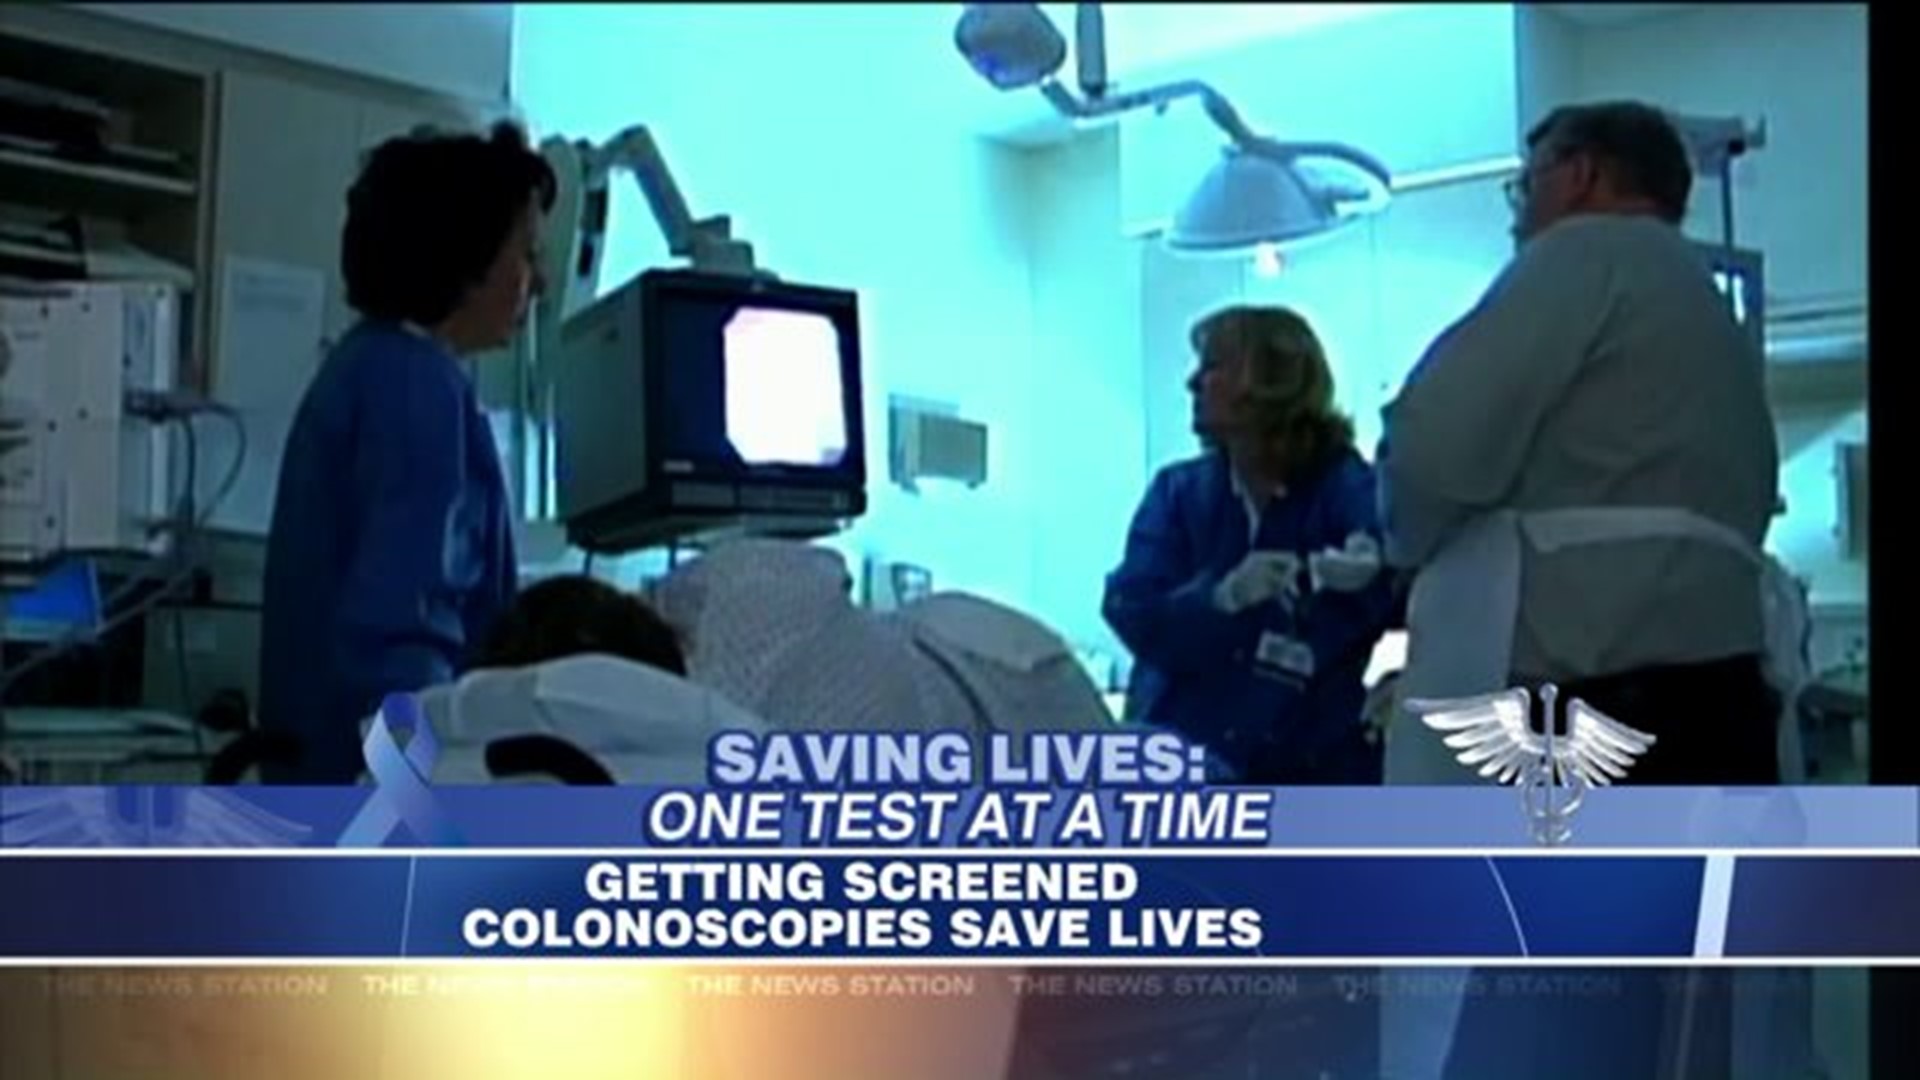 Getting Screened: Colonoscopies Save Lives